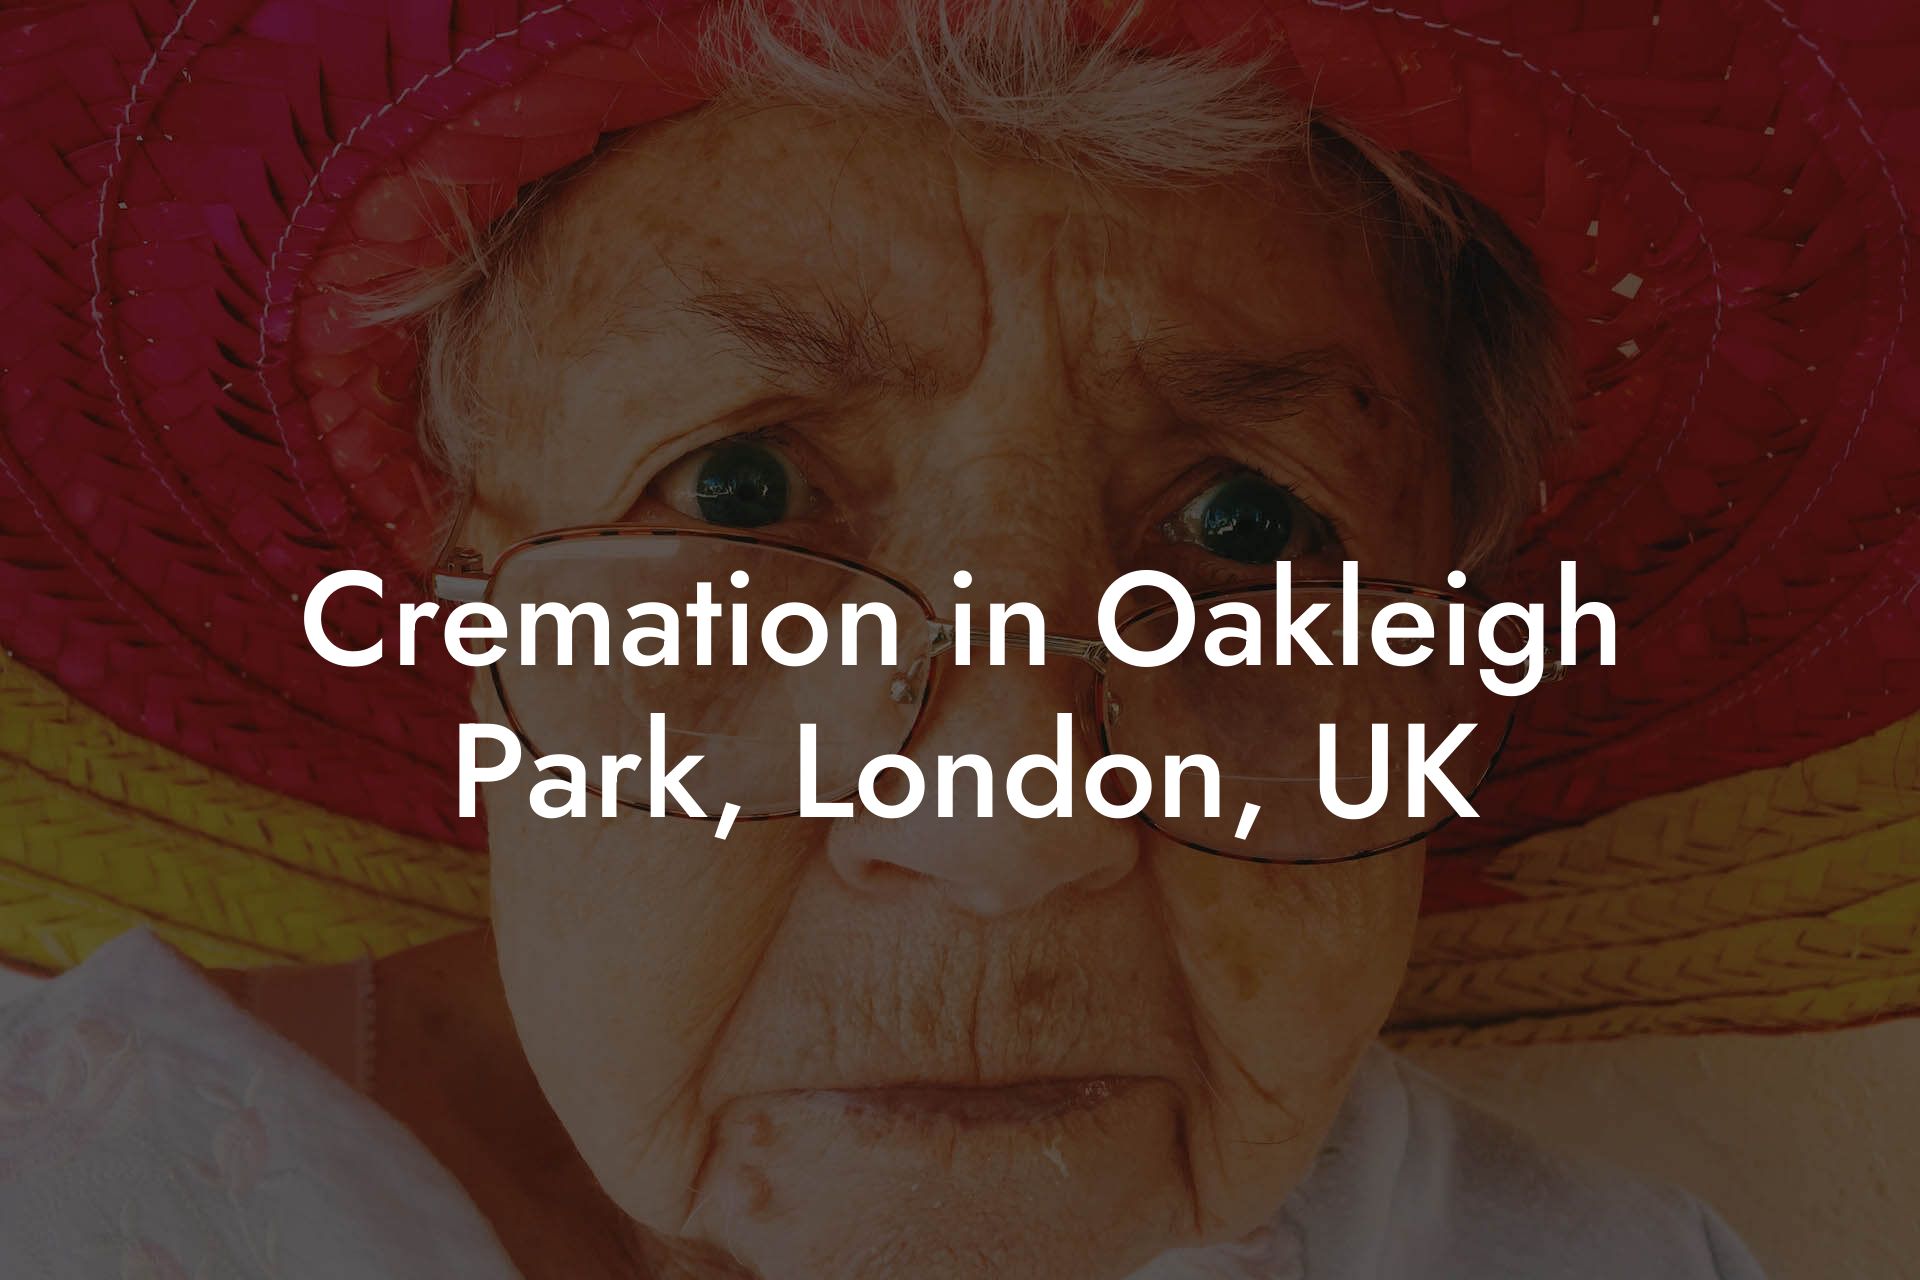 Cremation in Oakleigh Park, London, UK